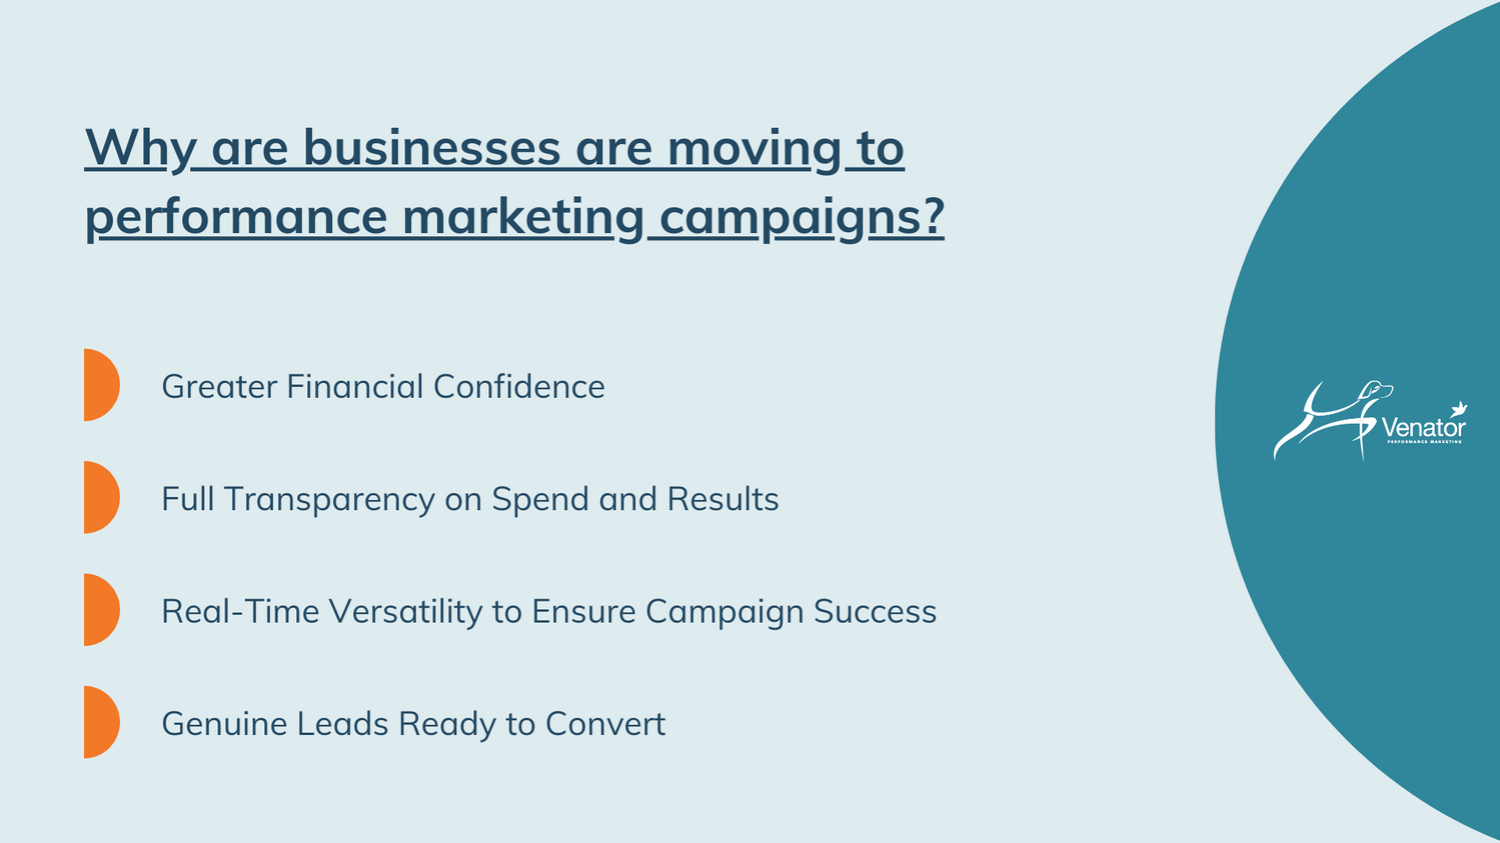 What do businesses receive from performance marketing campaigns?